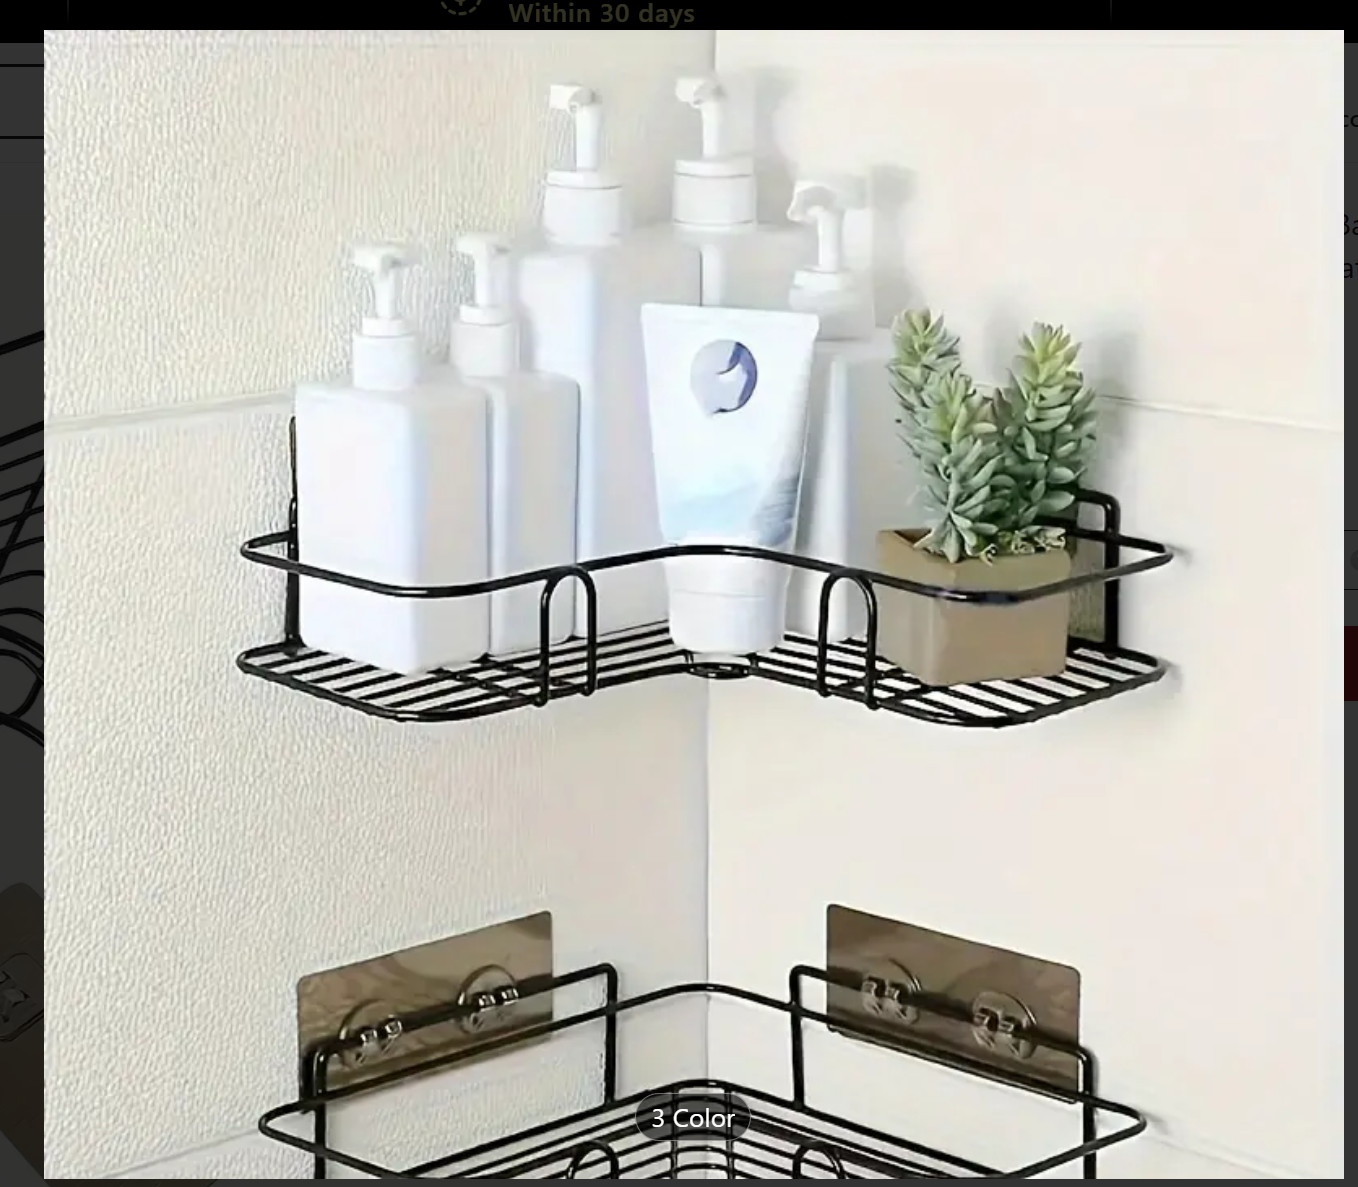 Triangle Brilliance: Stylish Wall Mounted Shower Caddy Rack for Effortless Bathroom and Kitchen Organization!